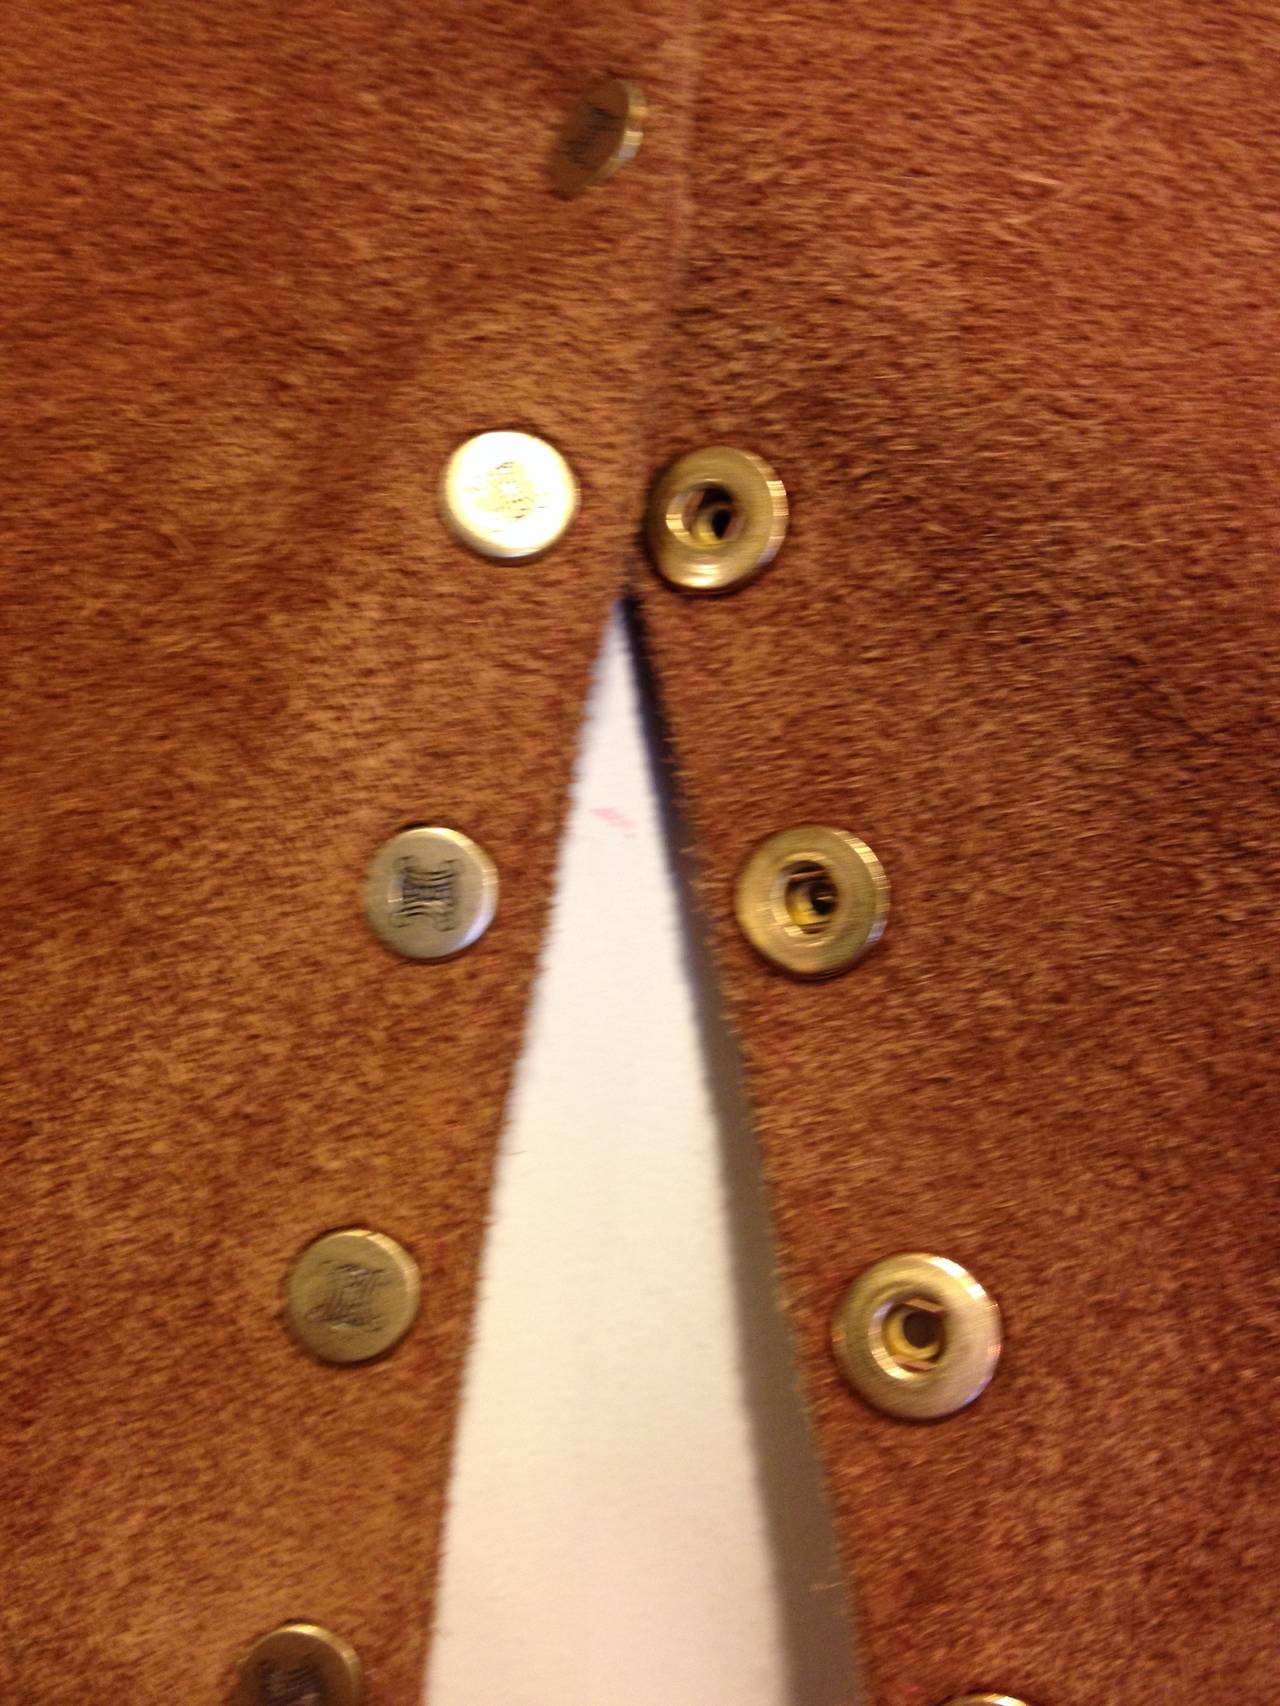 Celine dresses up a rugged western vest with super soft caramel brown suede and glossy gold-toned buttons for a beautiful effect. This vest has a very modern super clean cut - the simple round neckline and straight lines of gold studs adds sleekness